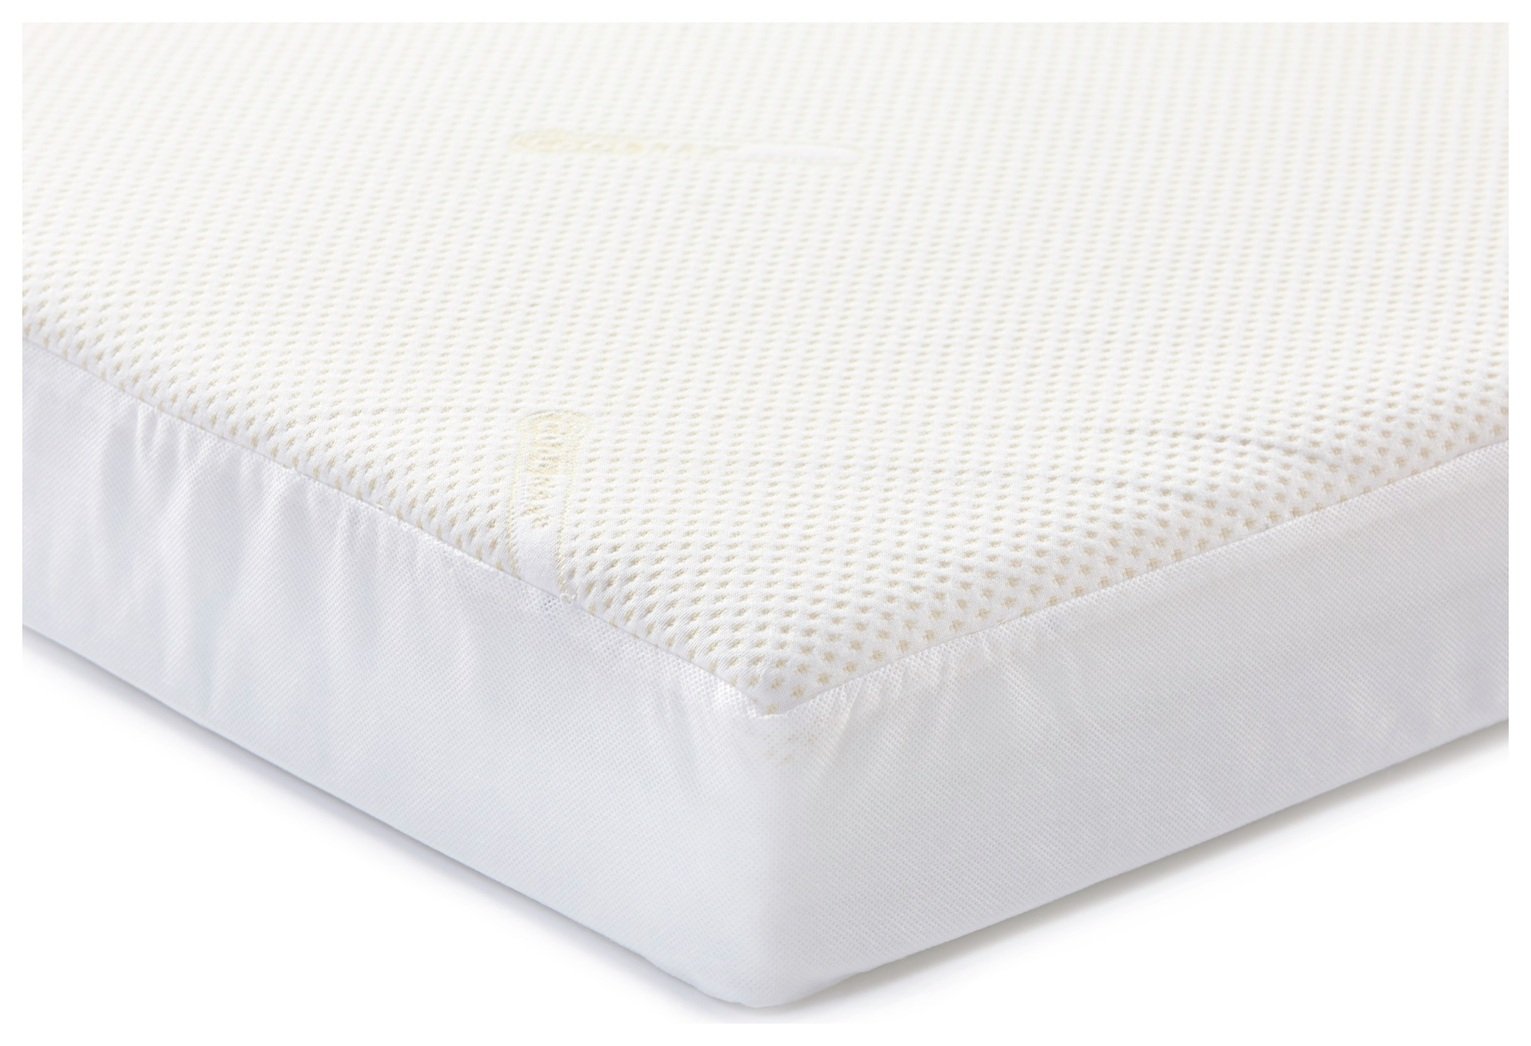 Baby Elegance 140 x 70cm Cool Flow Cot Bed Mattress Review